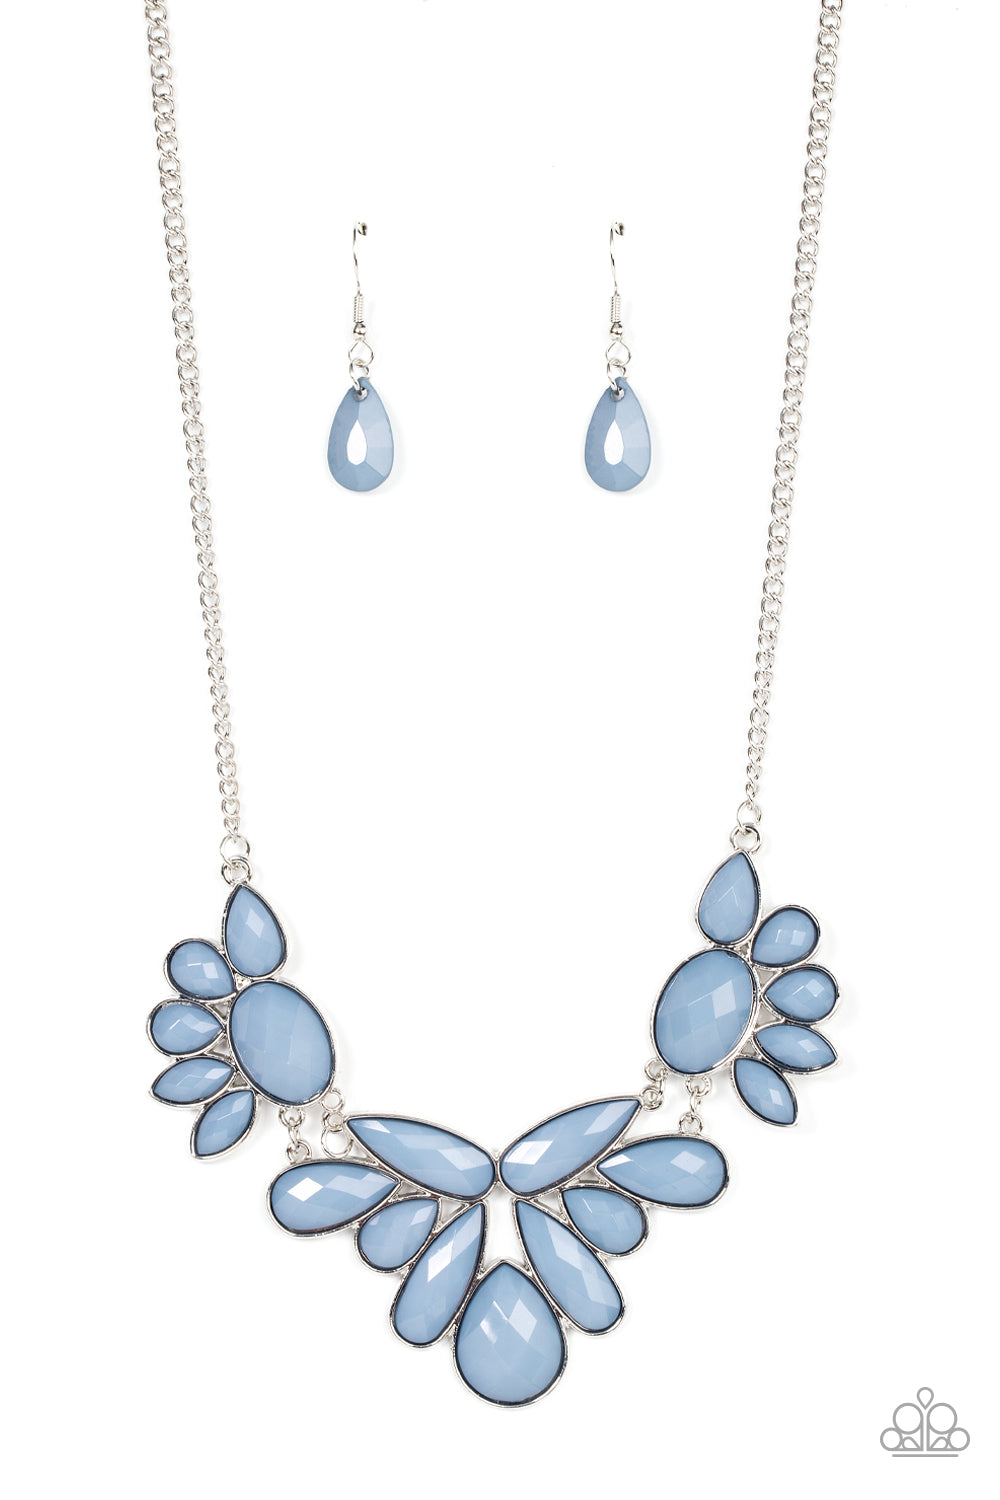 A Passing FAN-cy - Blue Necklace - Paparazzi Accessories